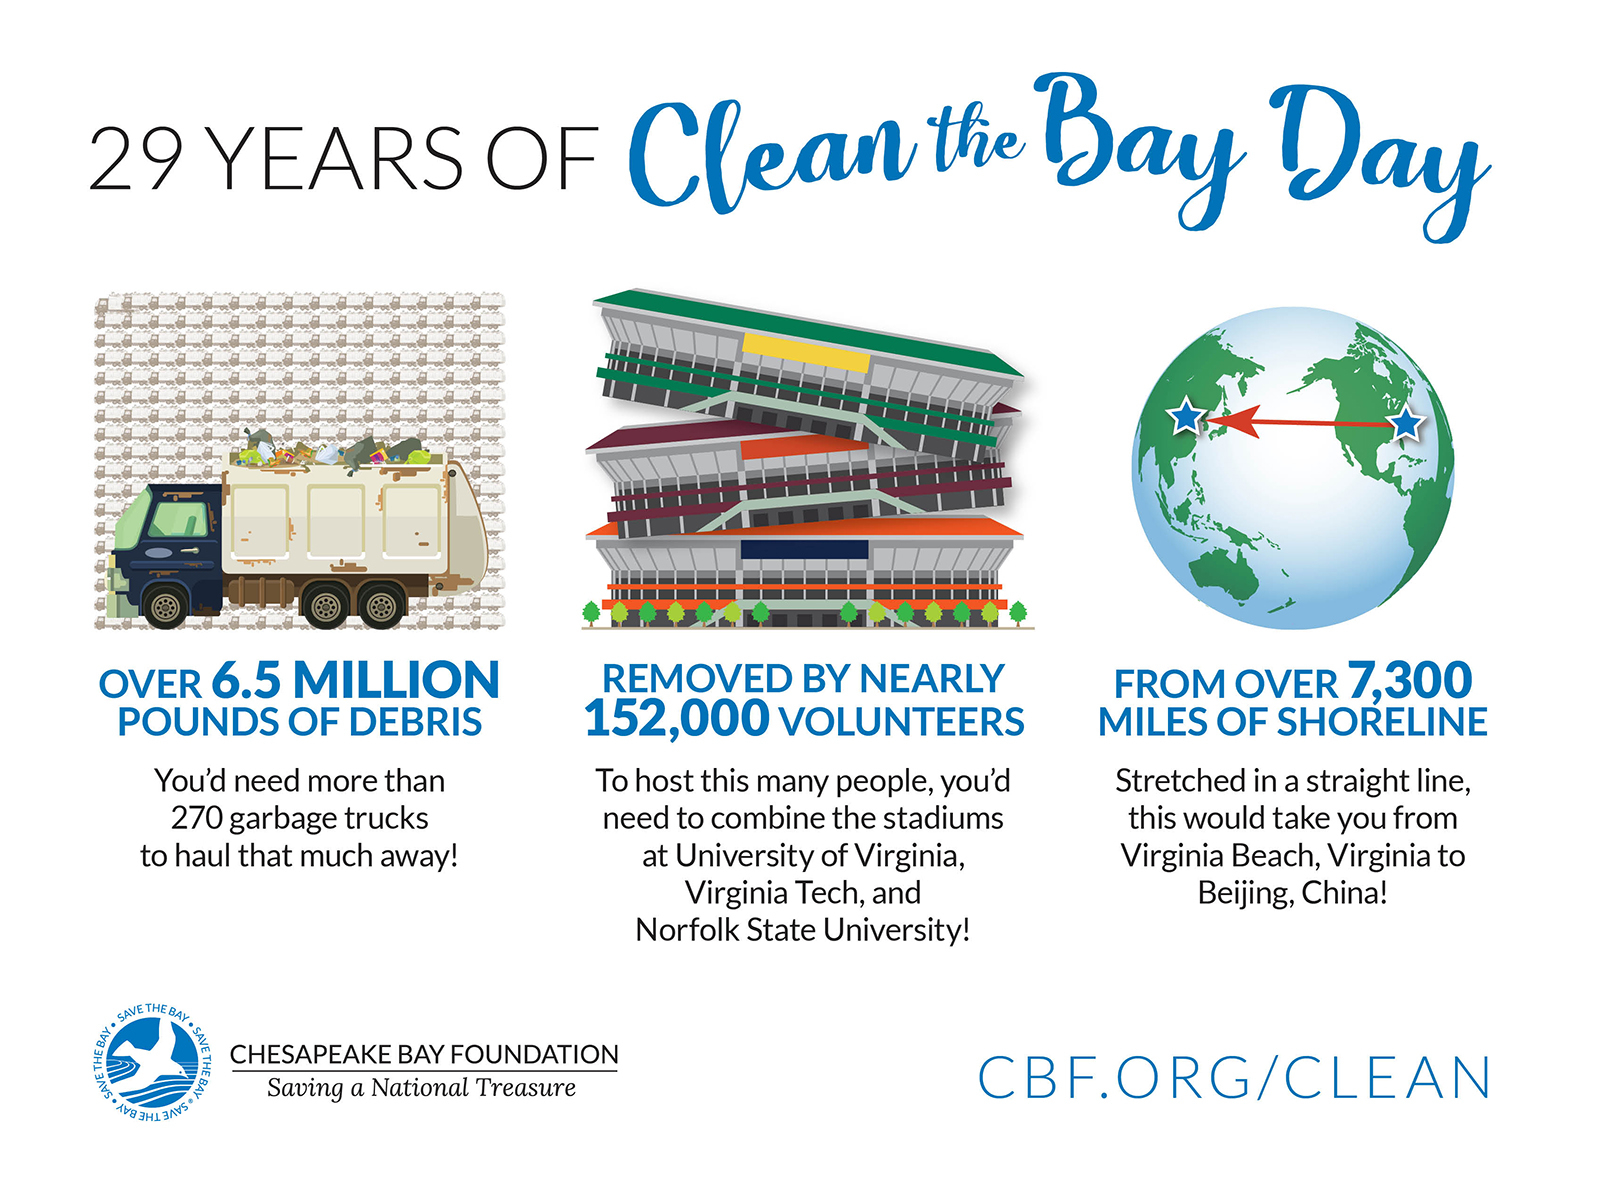 Clean the Bay Day Infographic by Lise Holliker Dykes on Dribbble